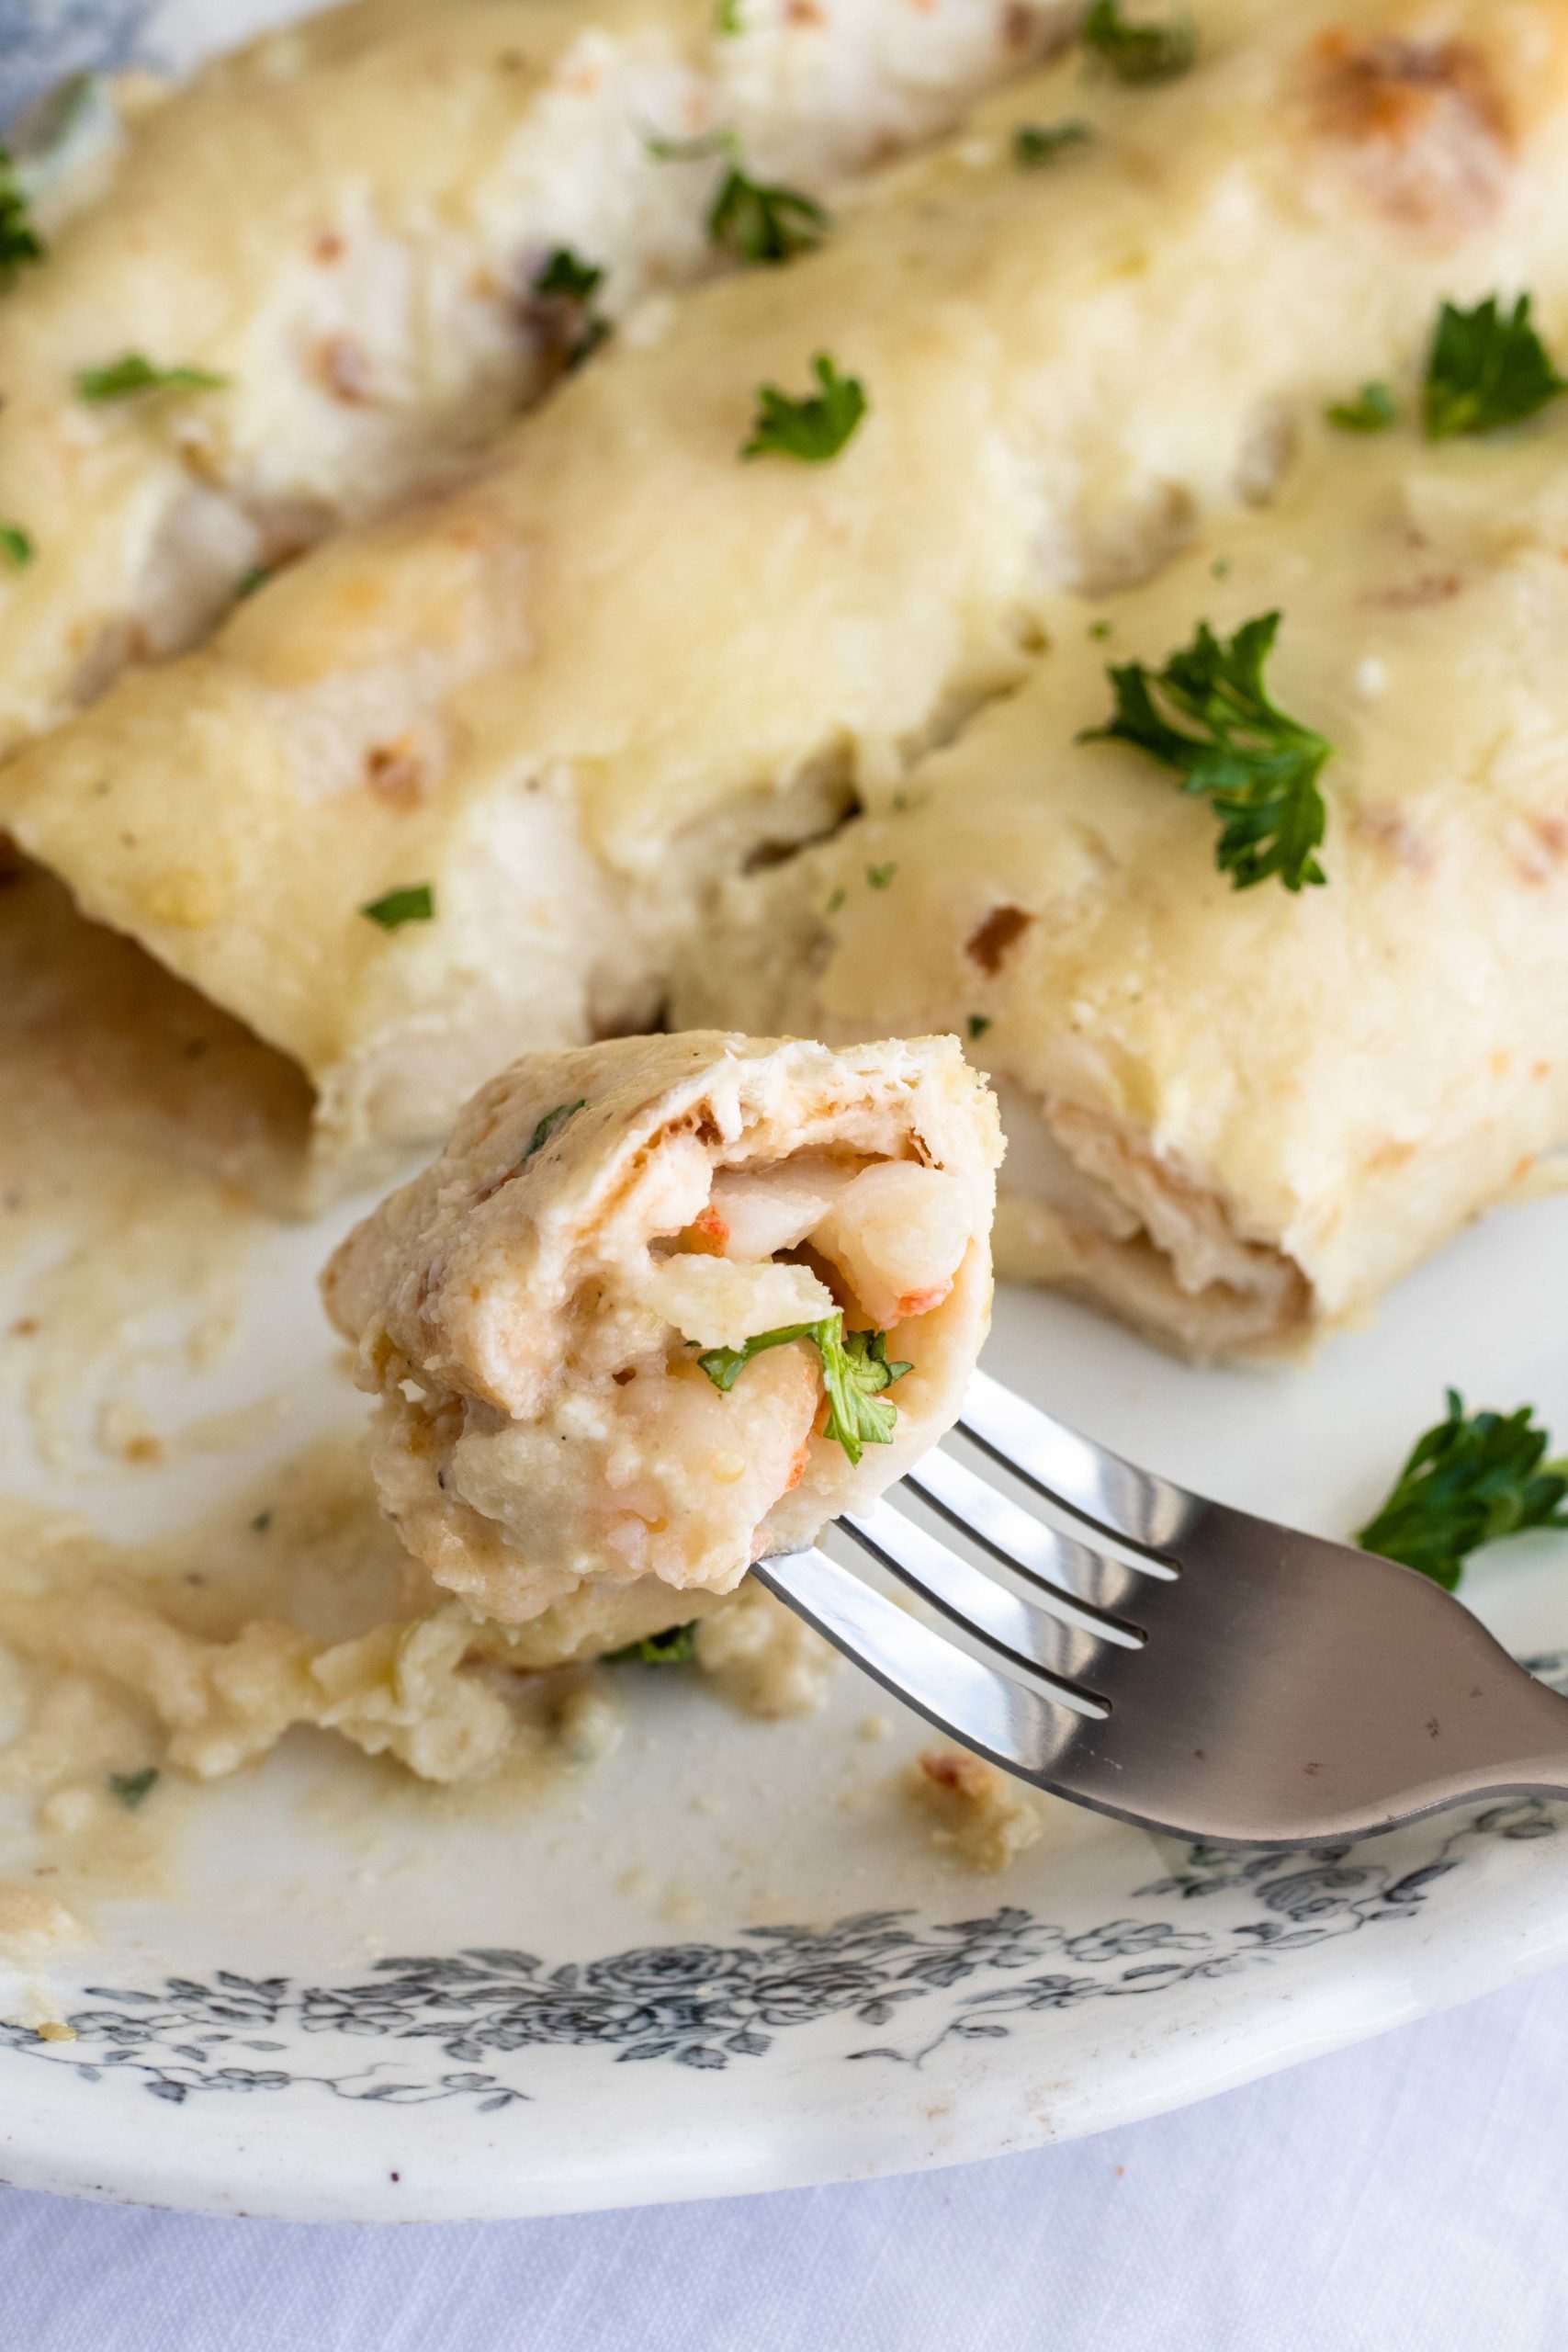 Bite of low carb shrimp enchilada with cheese sauce.